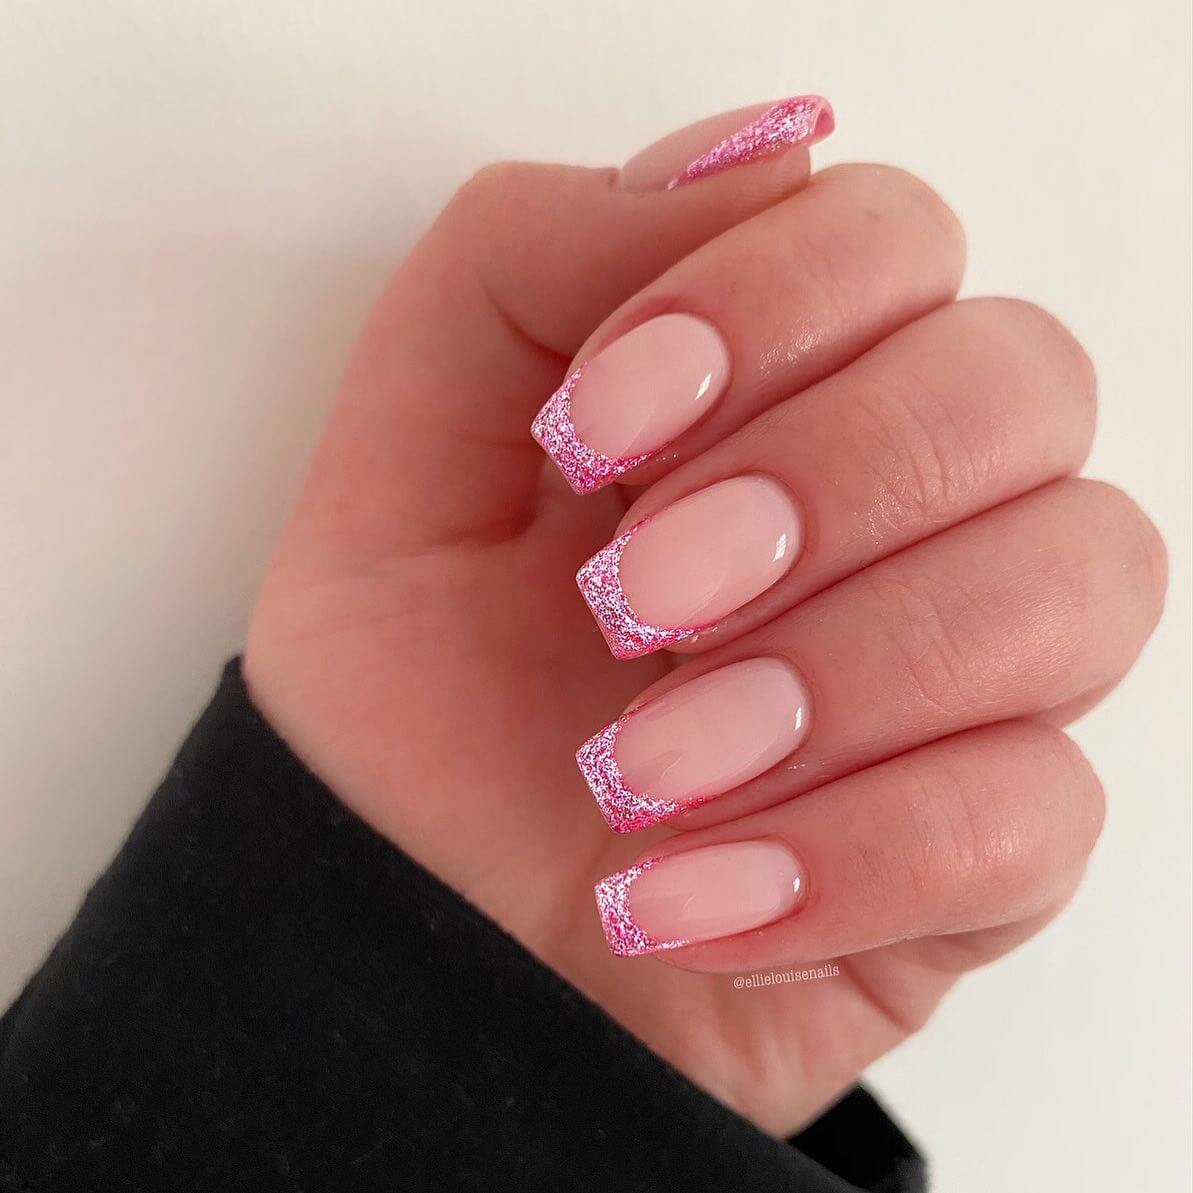 soft pink manicure with glittery tips